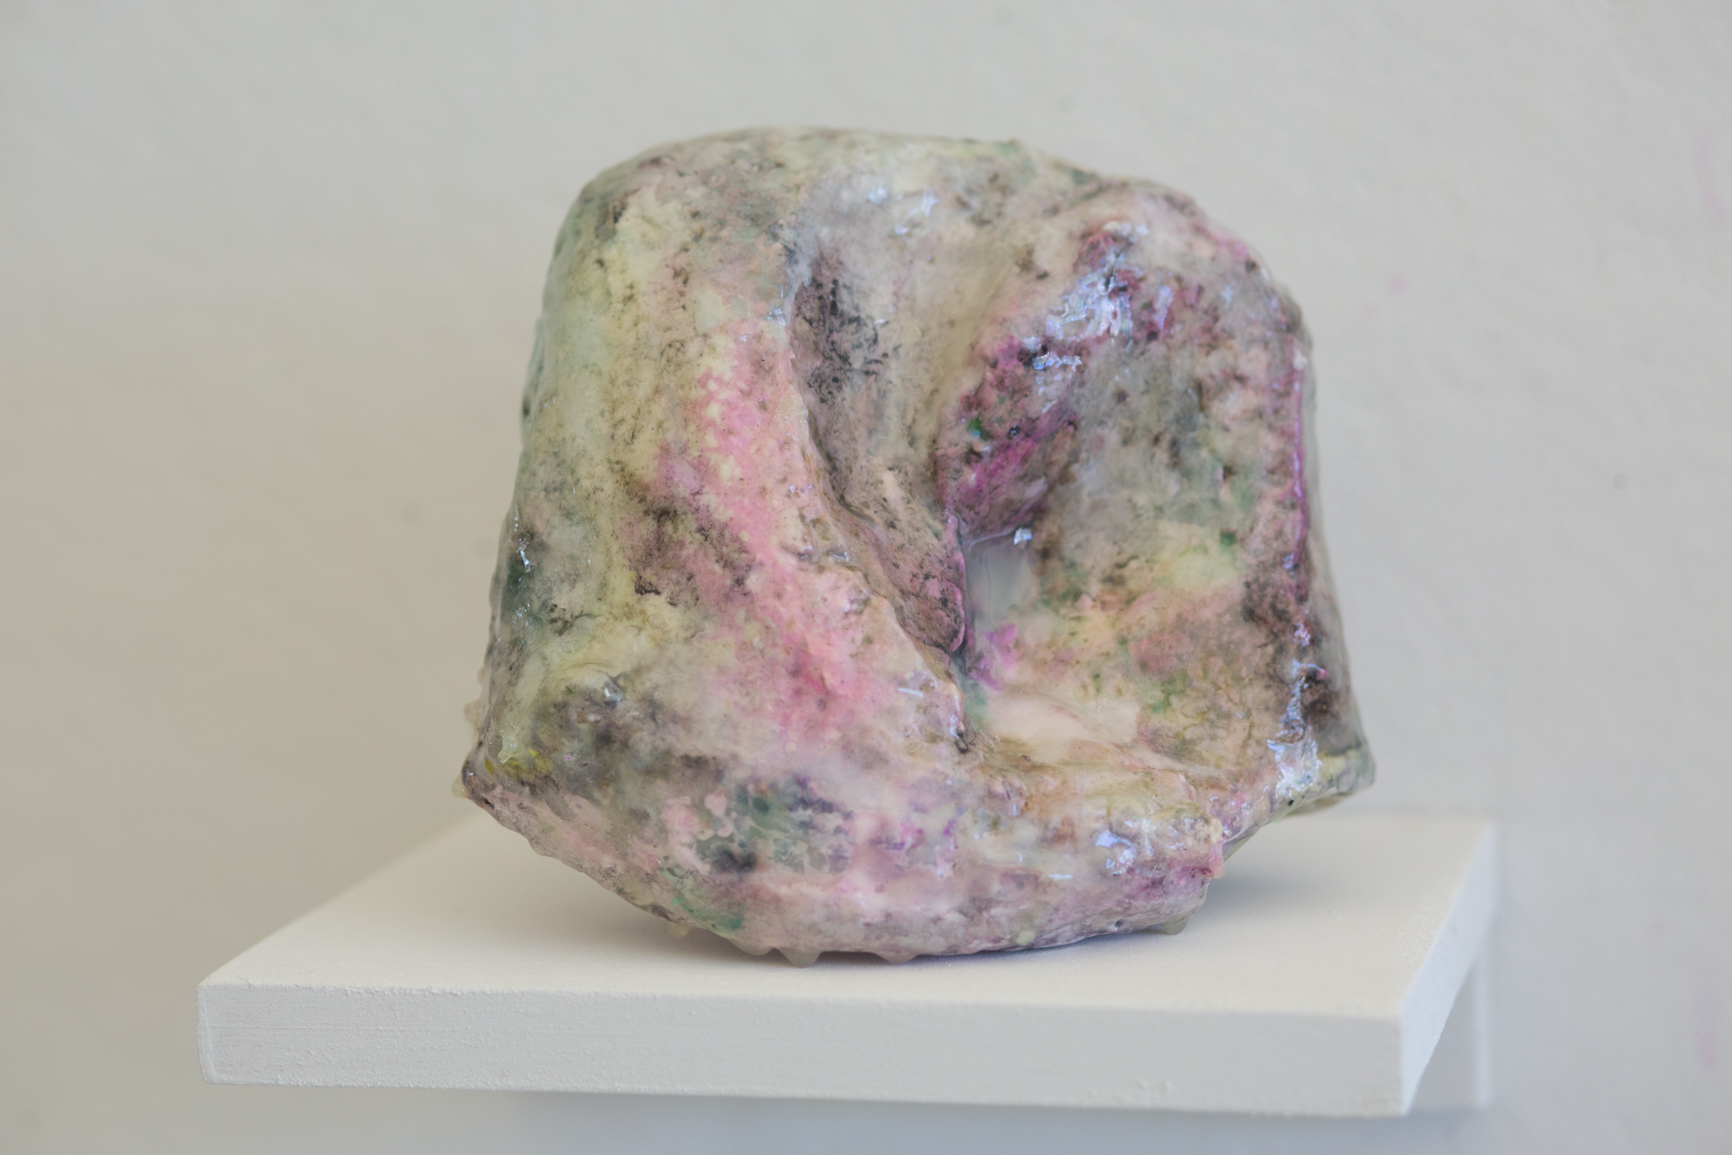   Surface Study 1 , 2018 Reclaimed material from recycling bin, plaster, paper mache, paint, epoxy resin, 10x10x4 inches 